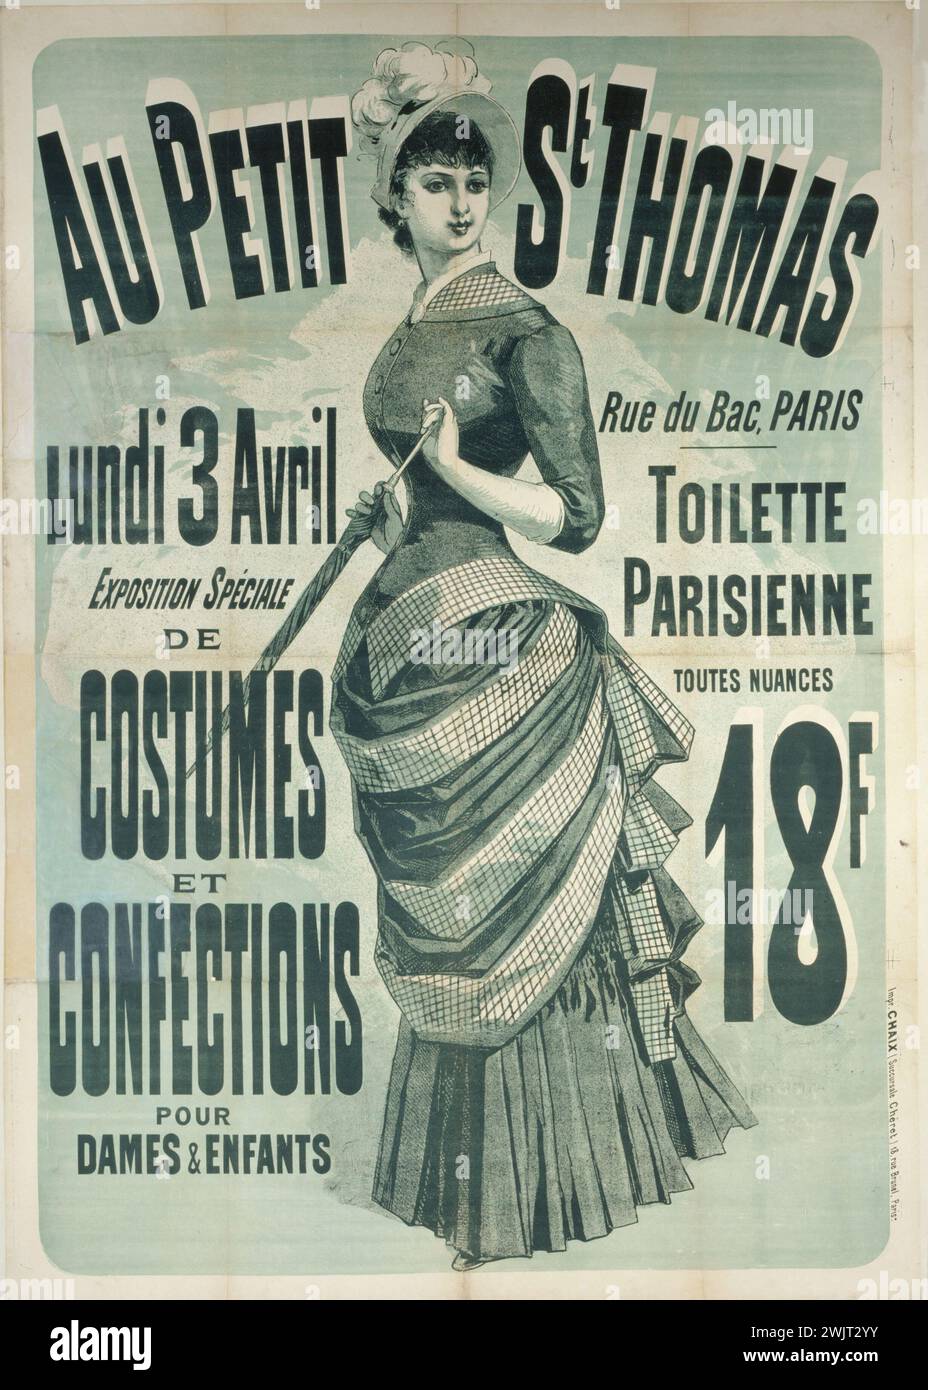 At Petit Saint -Thomas - Rue du Bac, Special Exhibition of Costumes and Confections for Ladies and Children '. Paris, Carnavalet museum. 27104-2 District VII, Au Petit Saint-Thomas, Confection, Costume, childish, special exhibition, store, mode, female fashion, advertising, rue de Bac, VII Eme 7th 7th Stock Photo